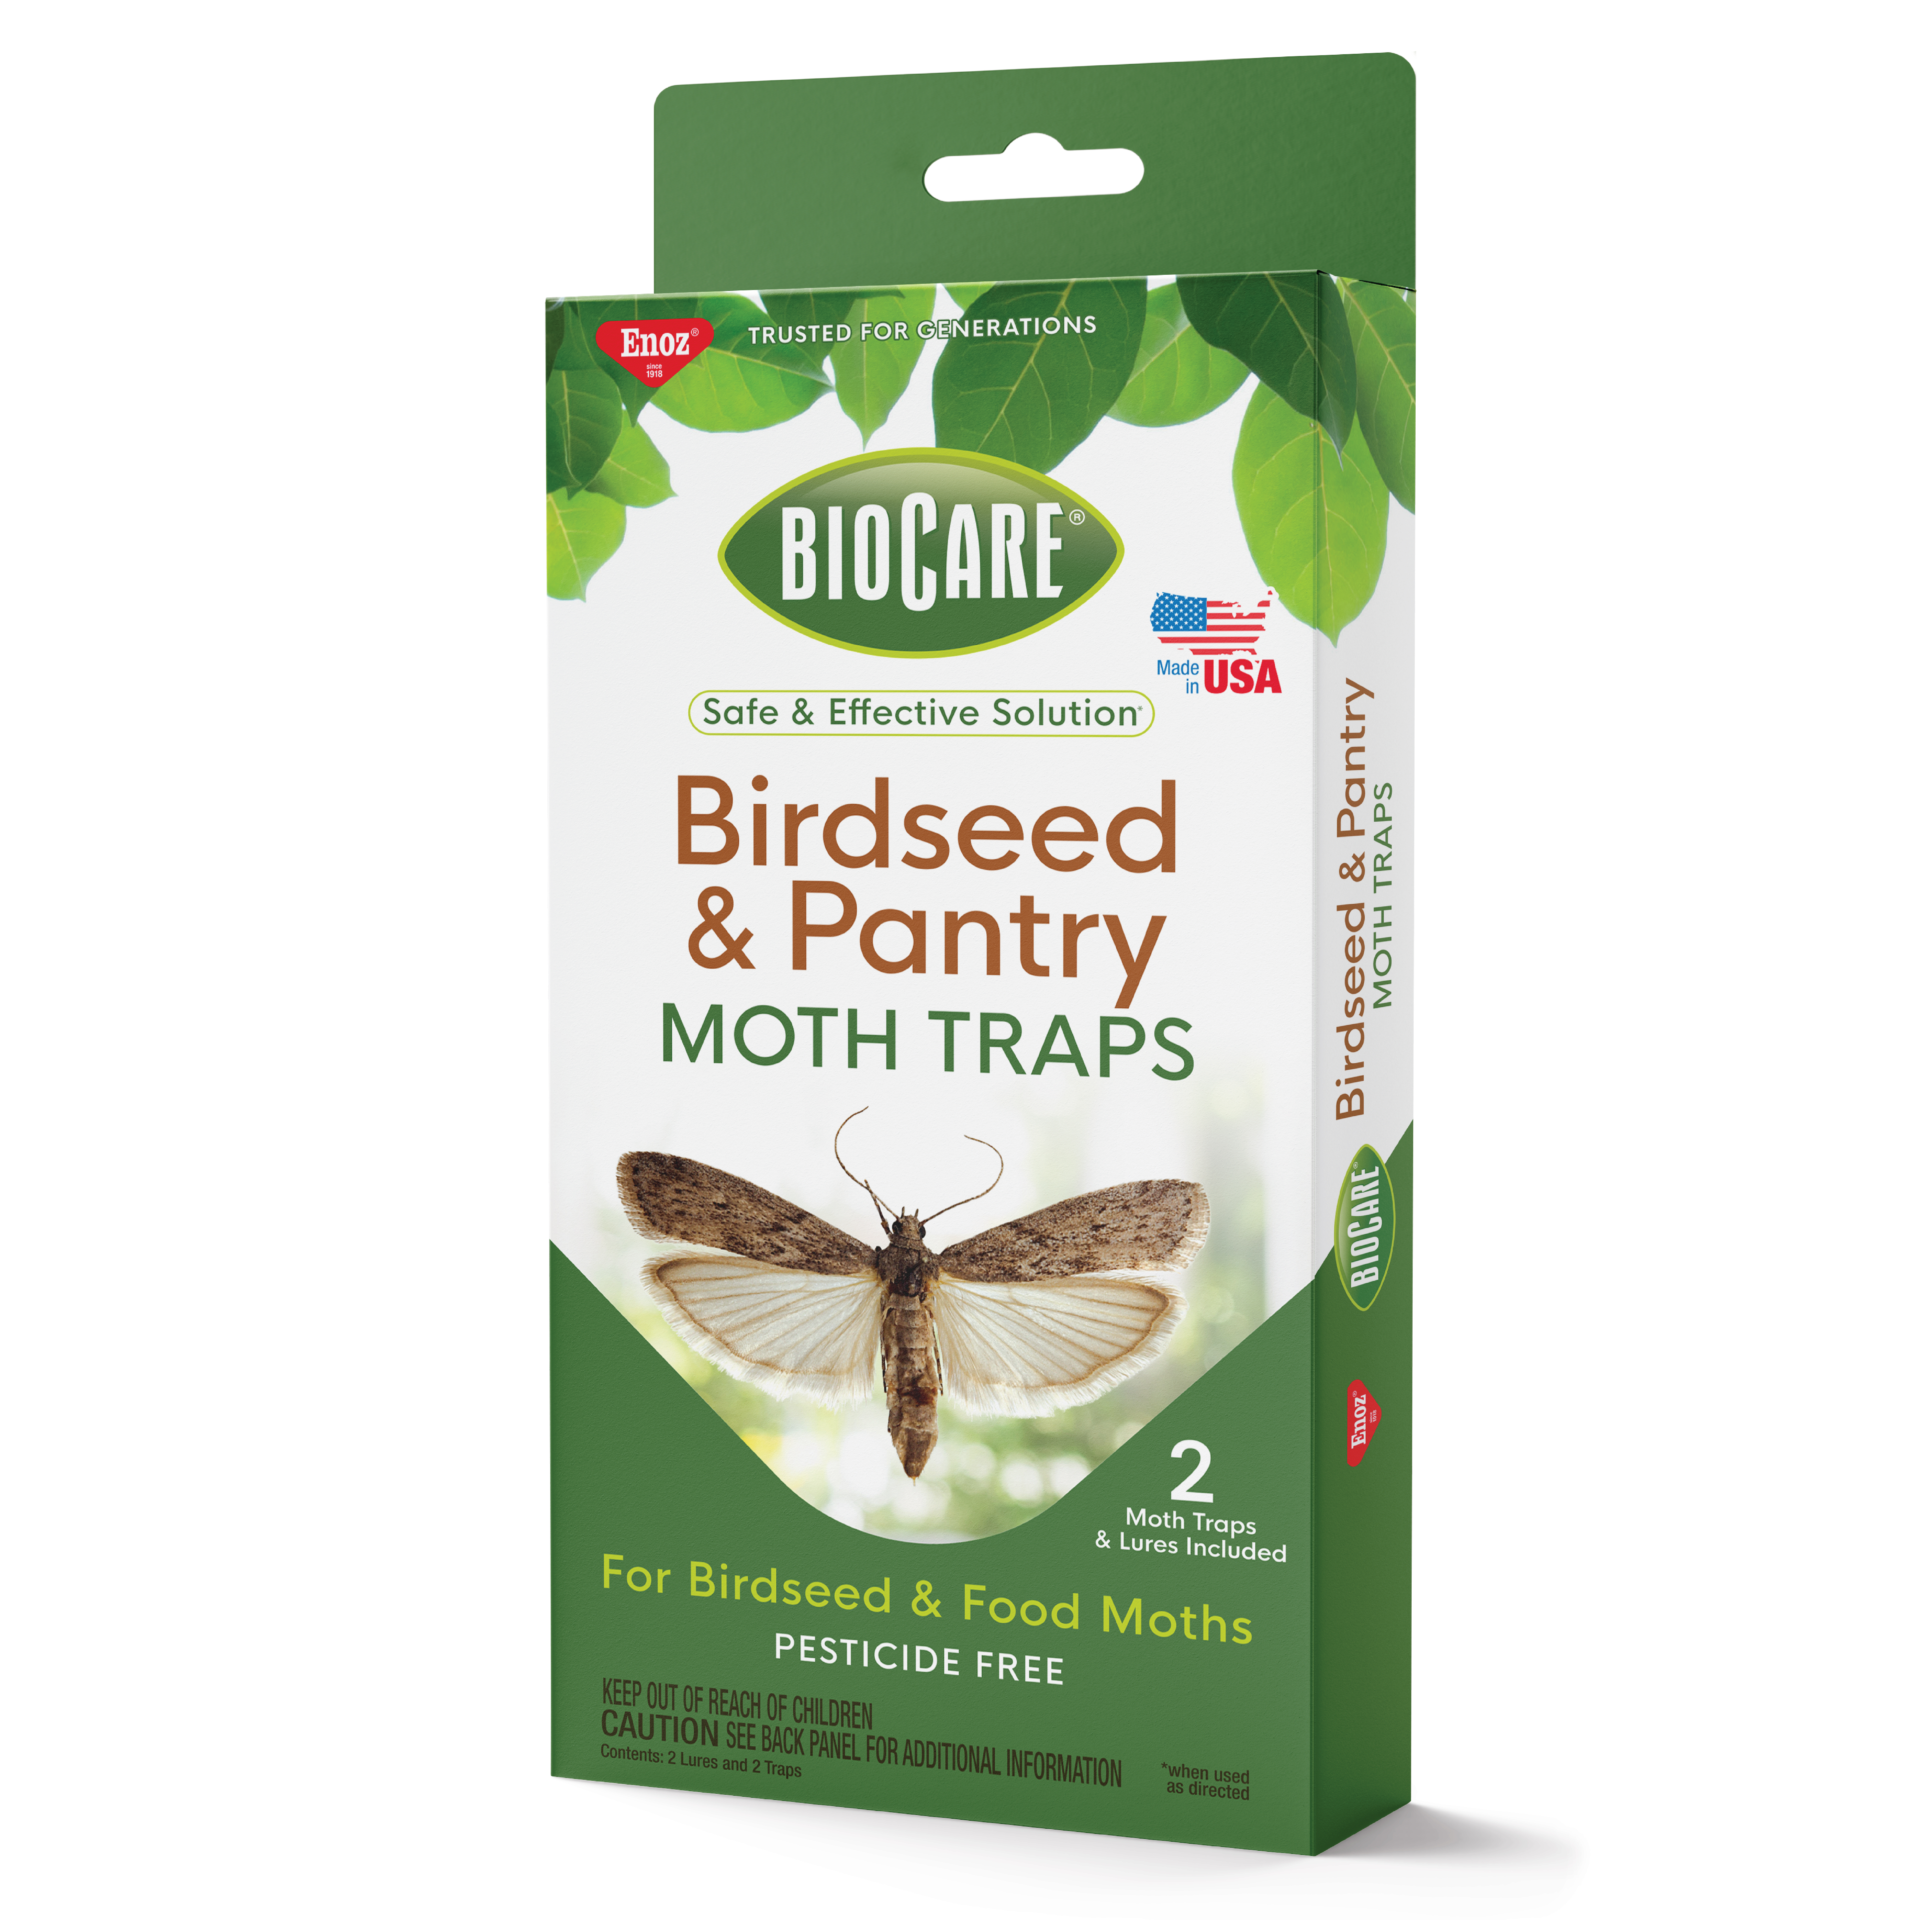 https://www.momjunction.com/wp-content/uploads/product-images/biocare-birdseed-and-pantry-moth-traps_afl975.png